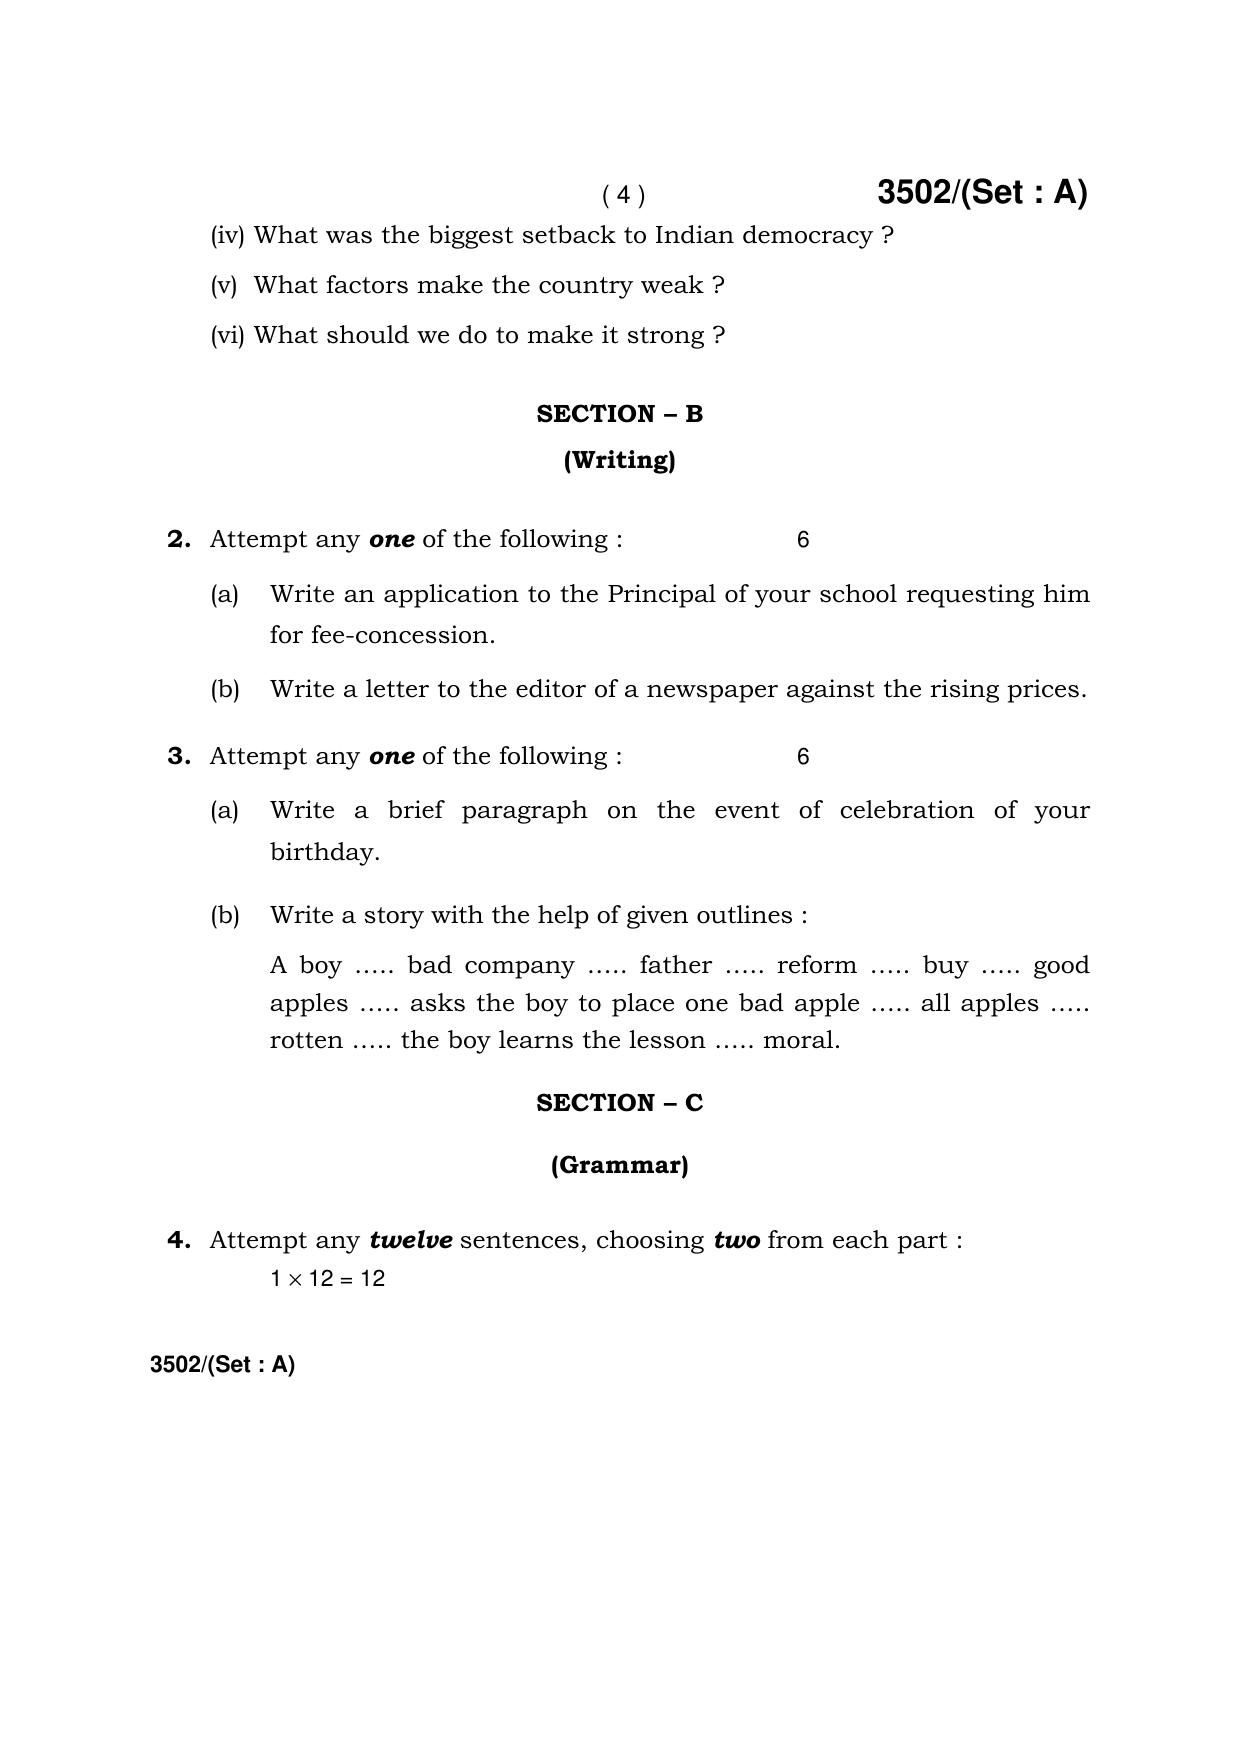 Haryana Board HBSE Class 10 English -A 2018 Question Paper - Page 4